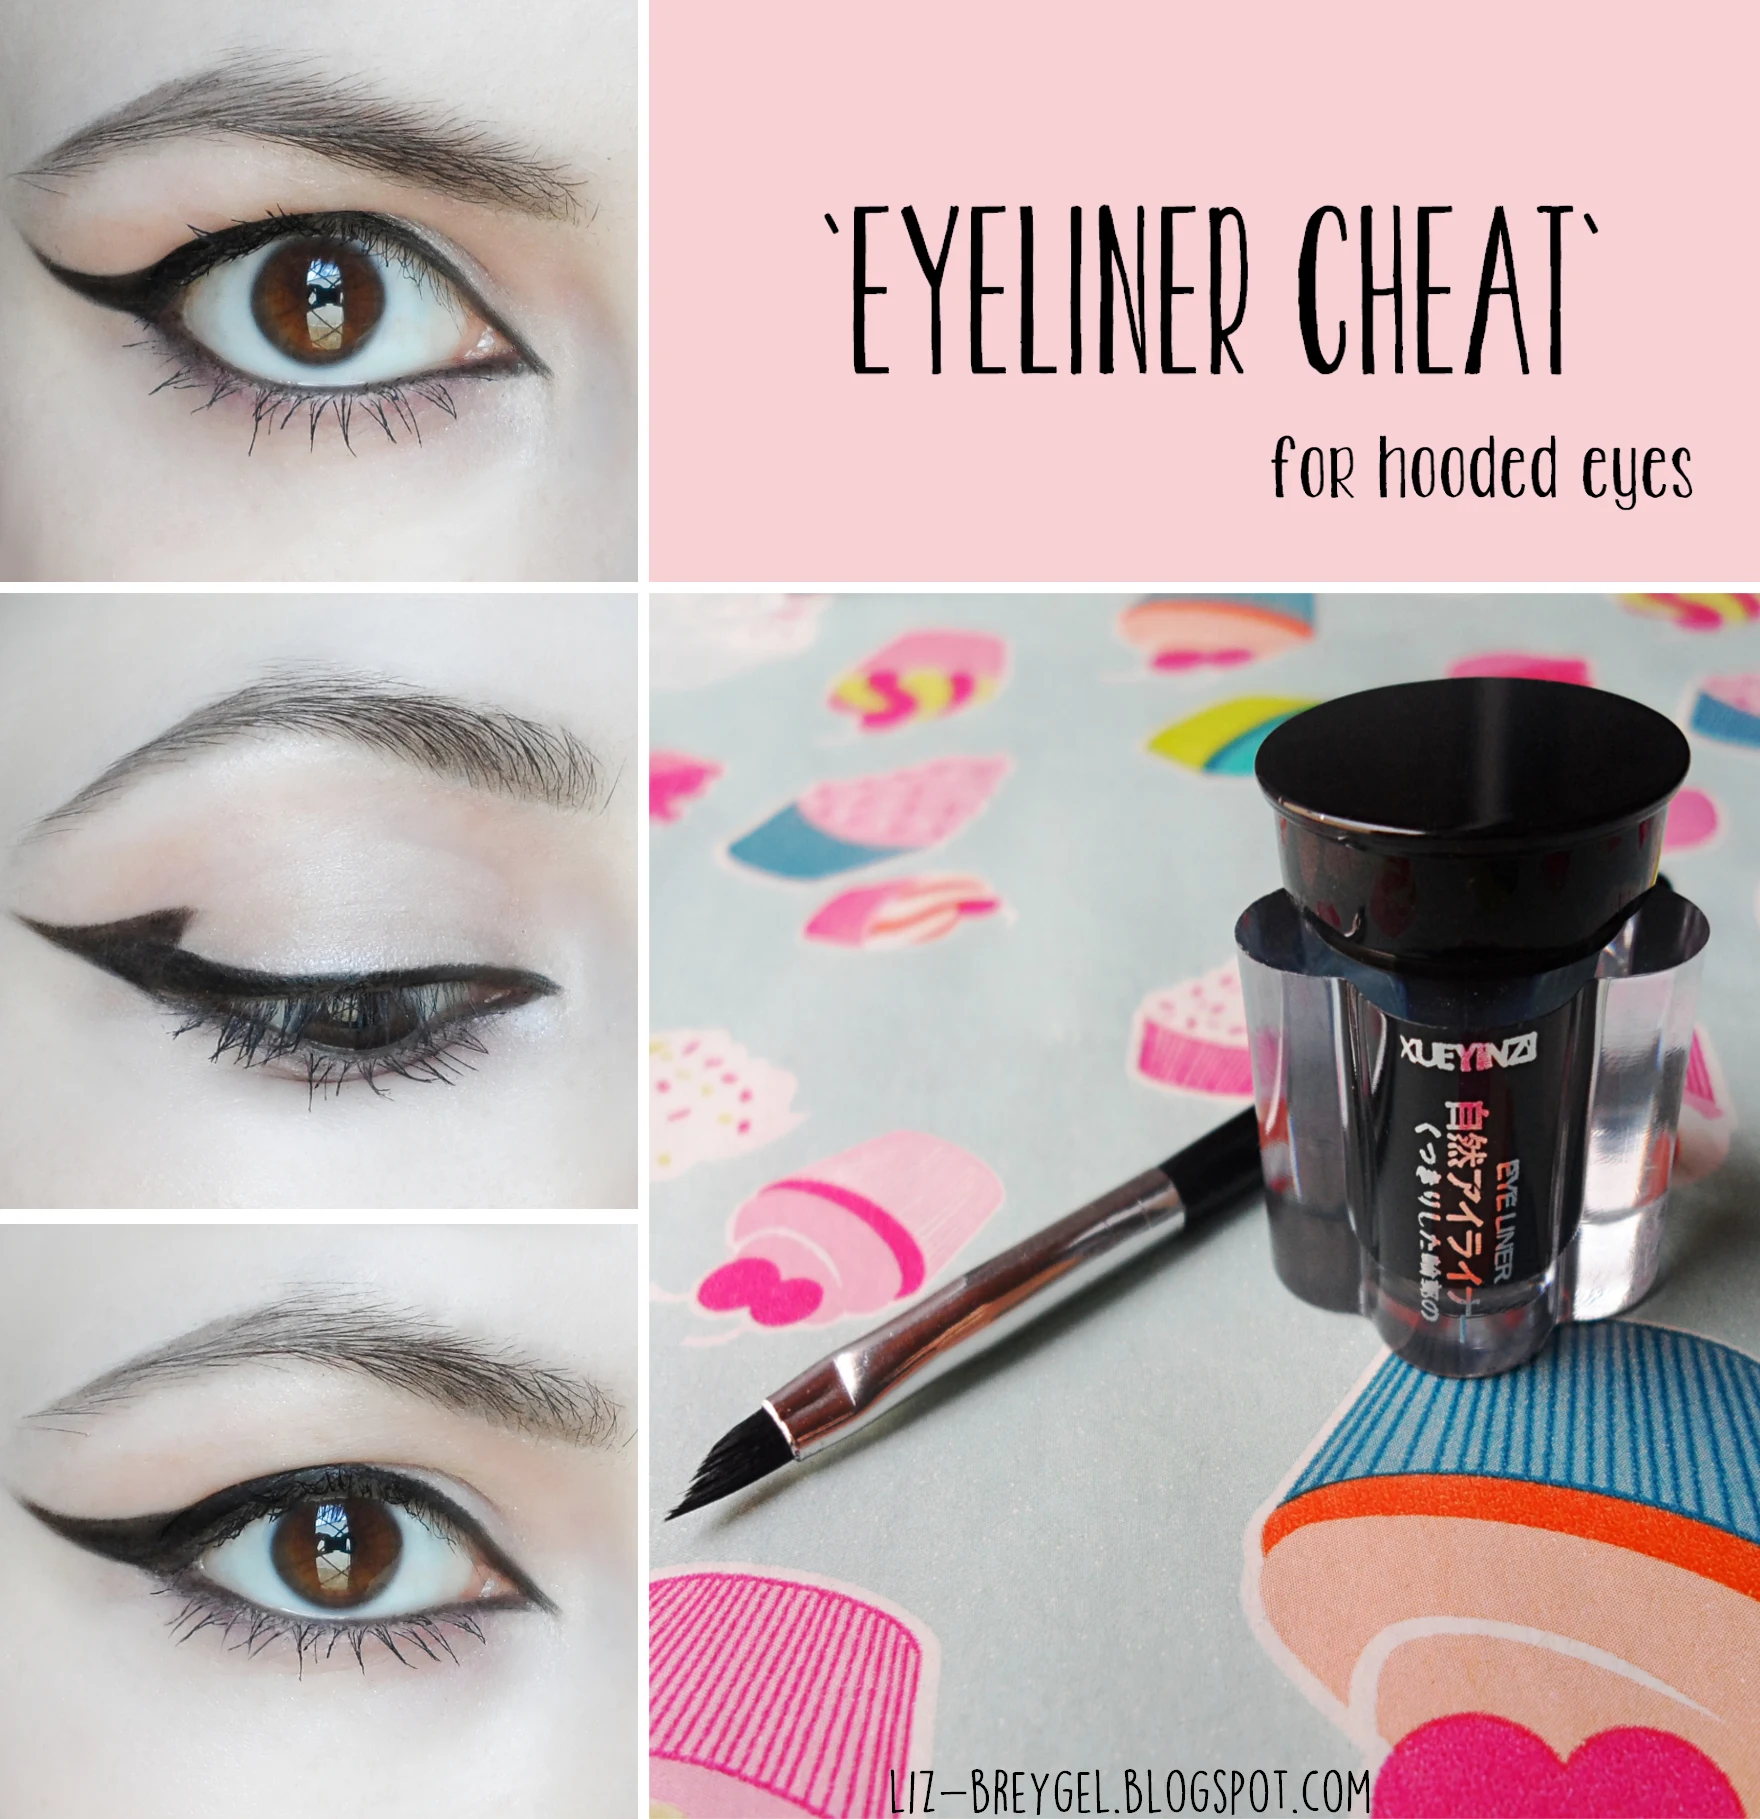 a step-by-step makeup pictorial that demonstrates how to apply liquid eyeliner to hooded eyes and small eyelids?